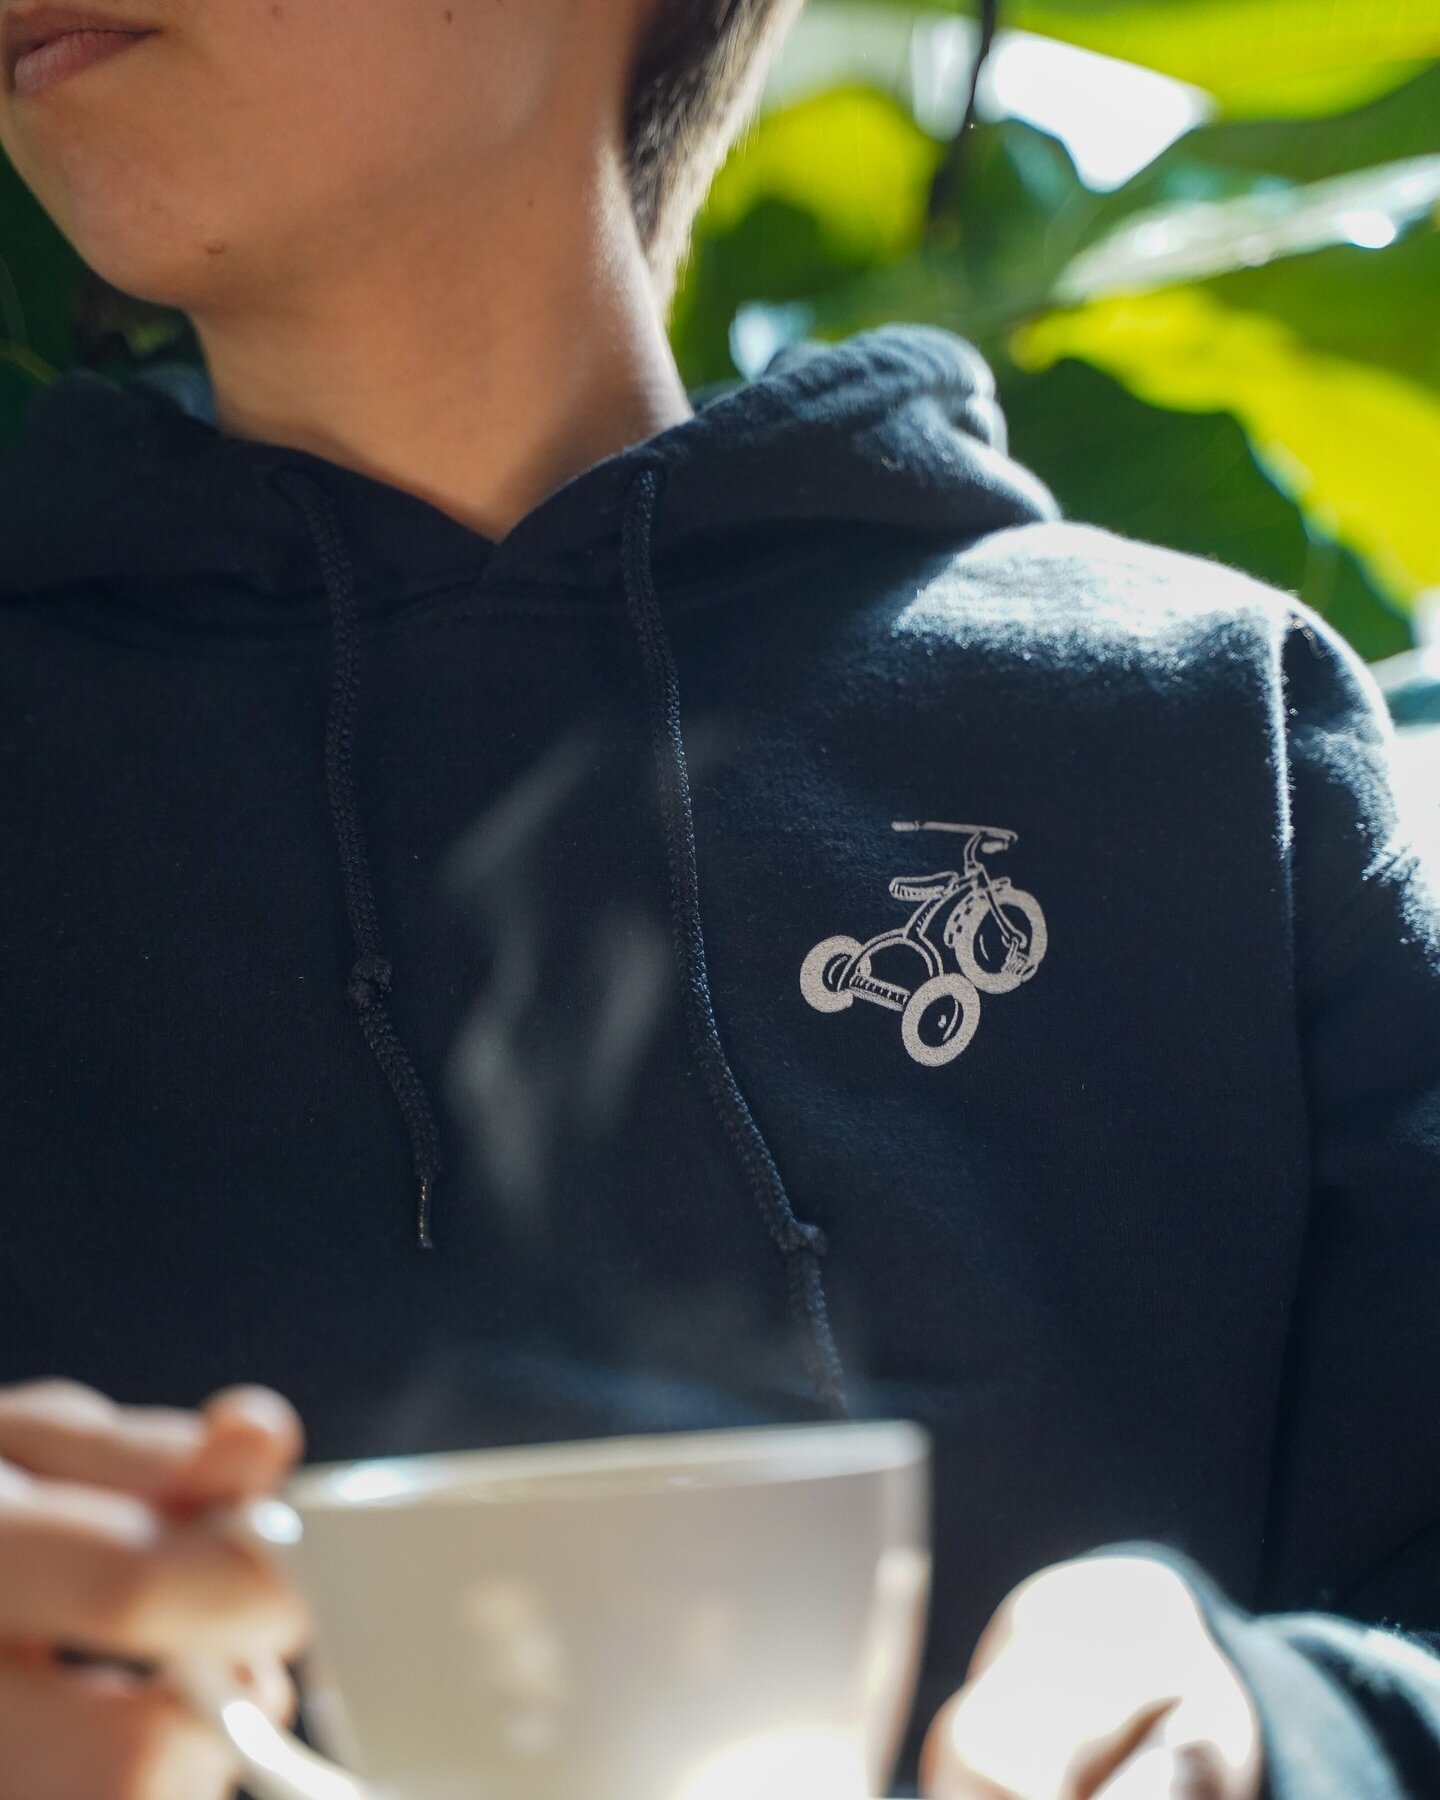 We still have sizes in our popular Tricycle Logo Hoodie in the cafe. You can also order online for delivery! #shopsmall #shopsmallbusiness #tricyclecafeandbar #coffee #conshohocken #pennsylvania